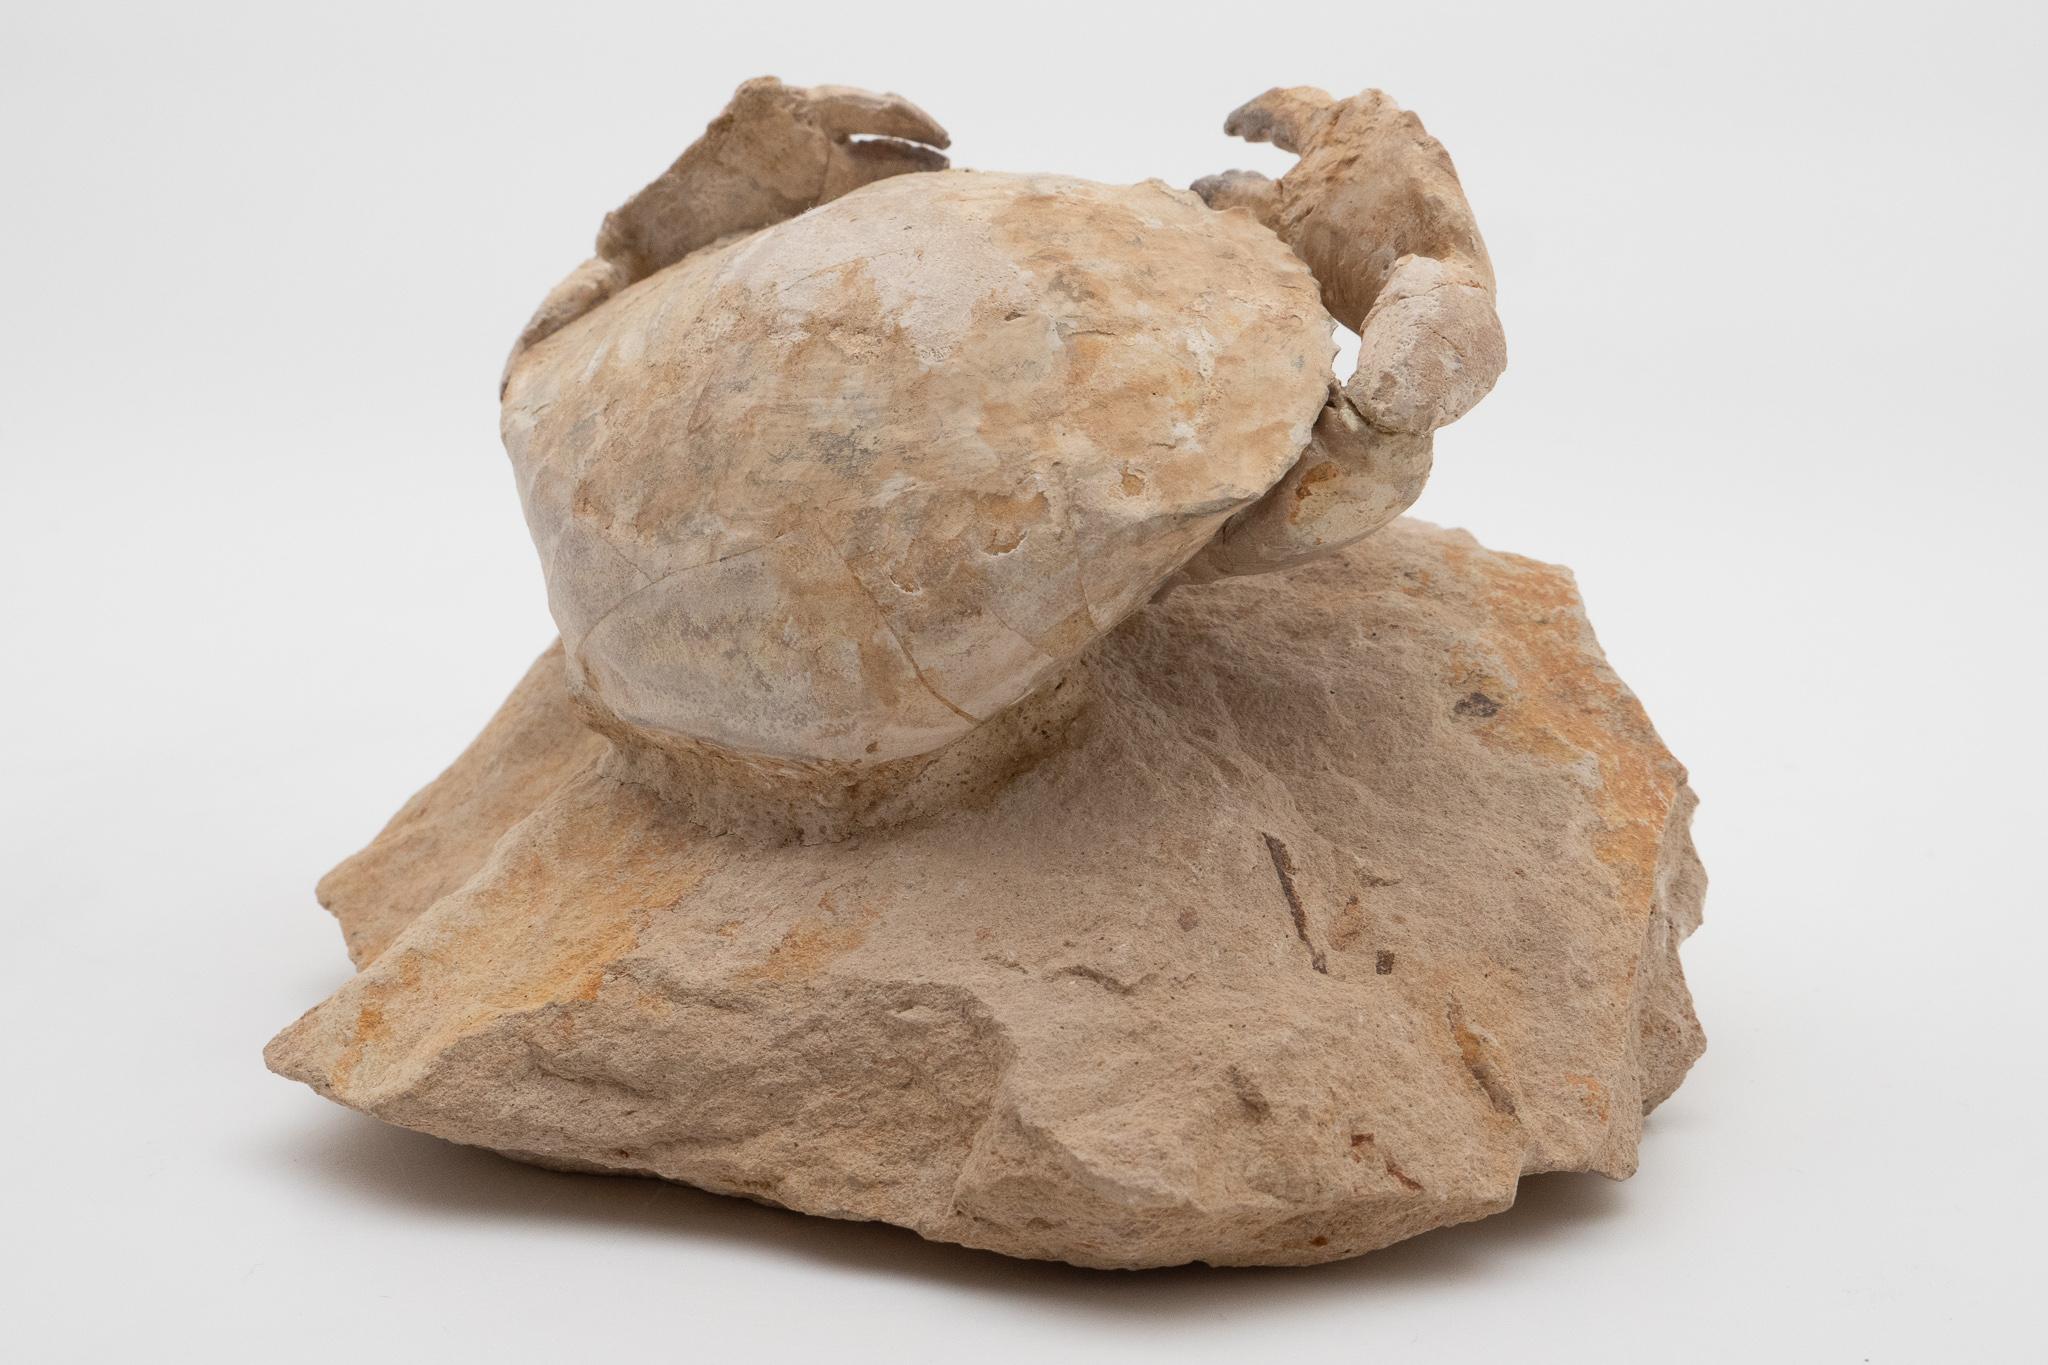 18th Century and Earlier Fossilized Crab Specimen, Eocene Period, Italy